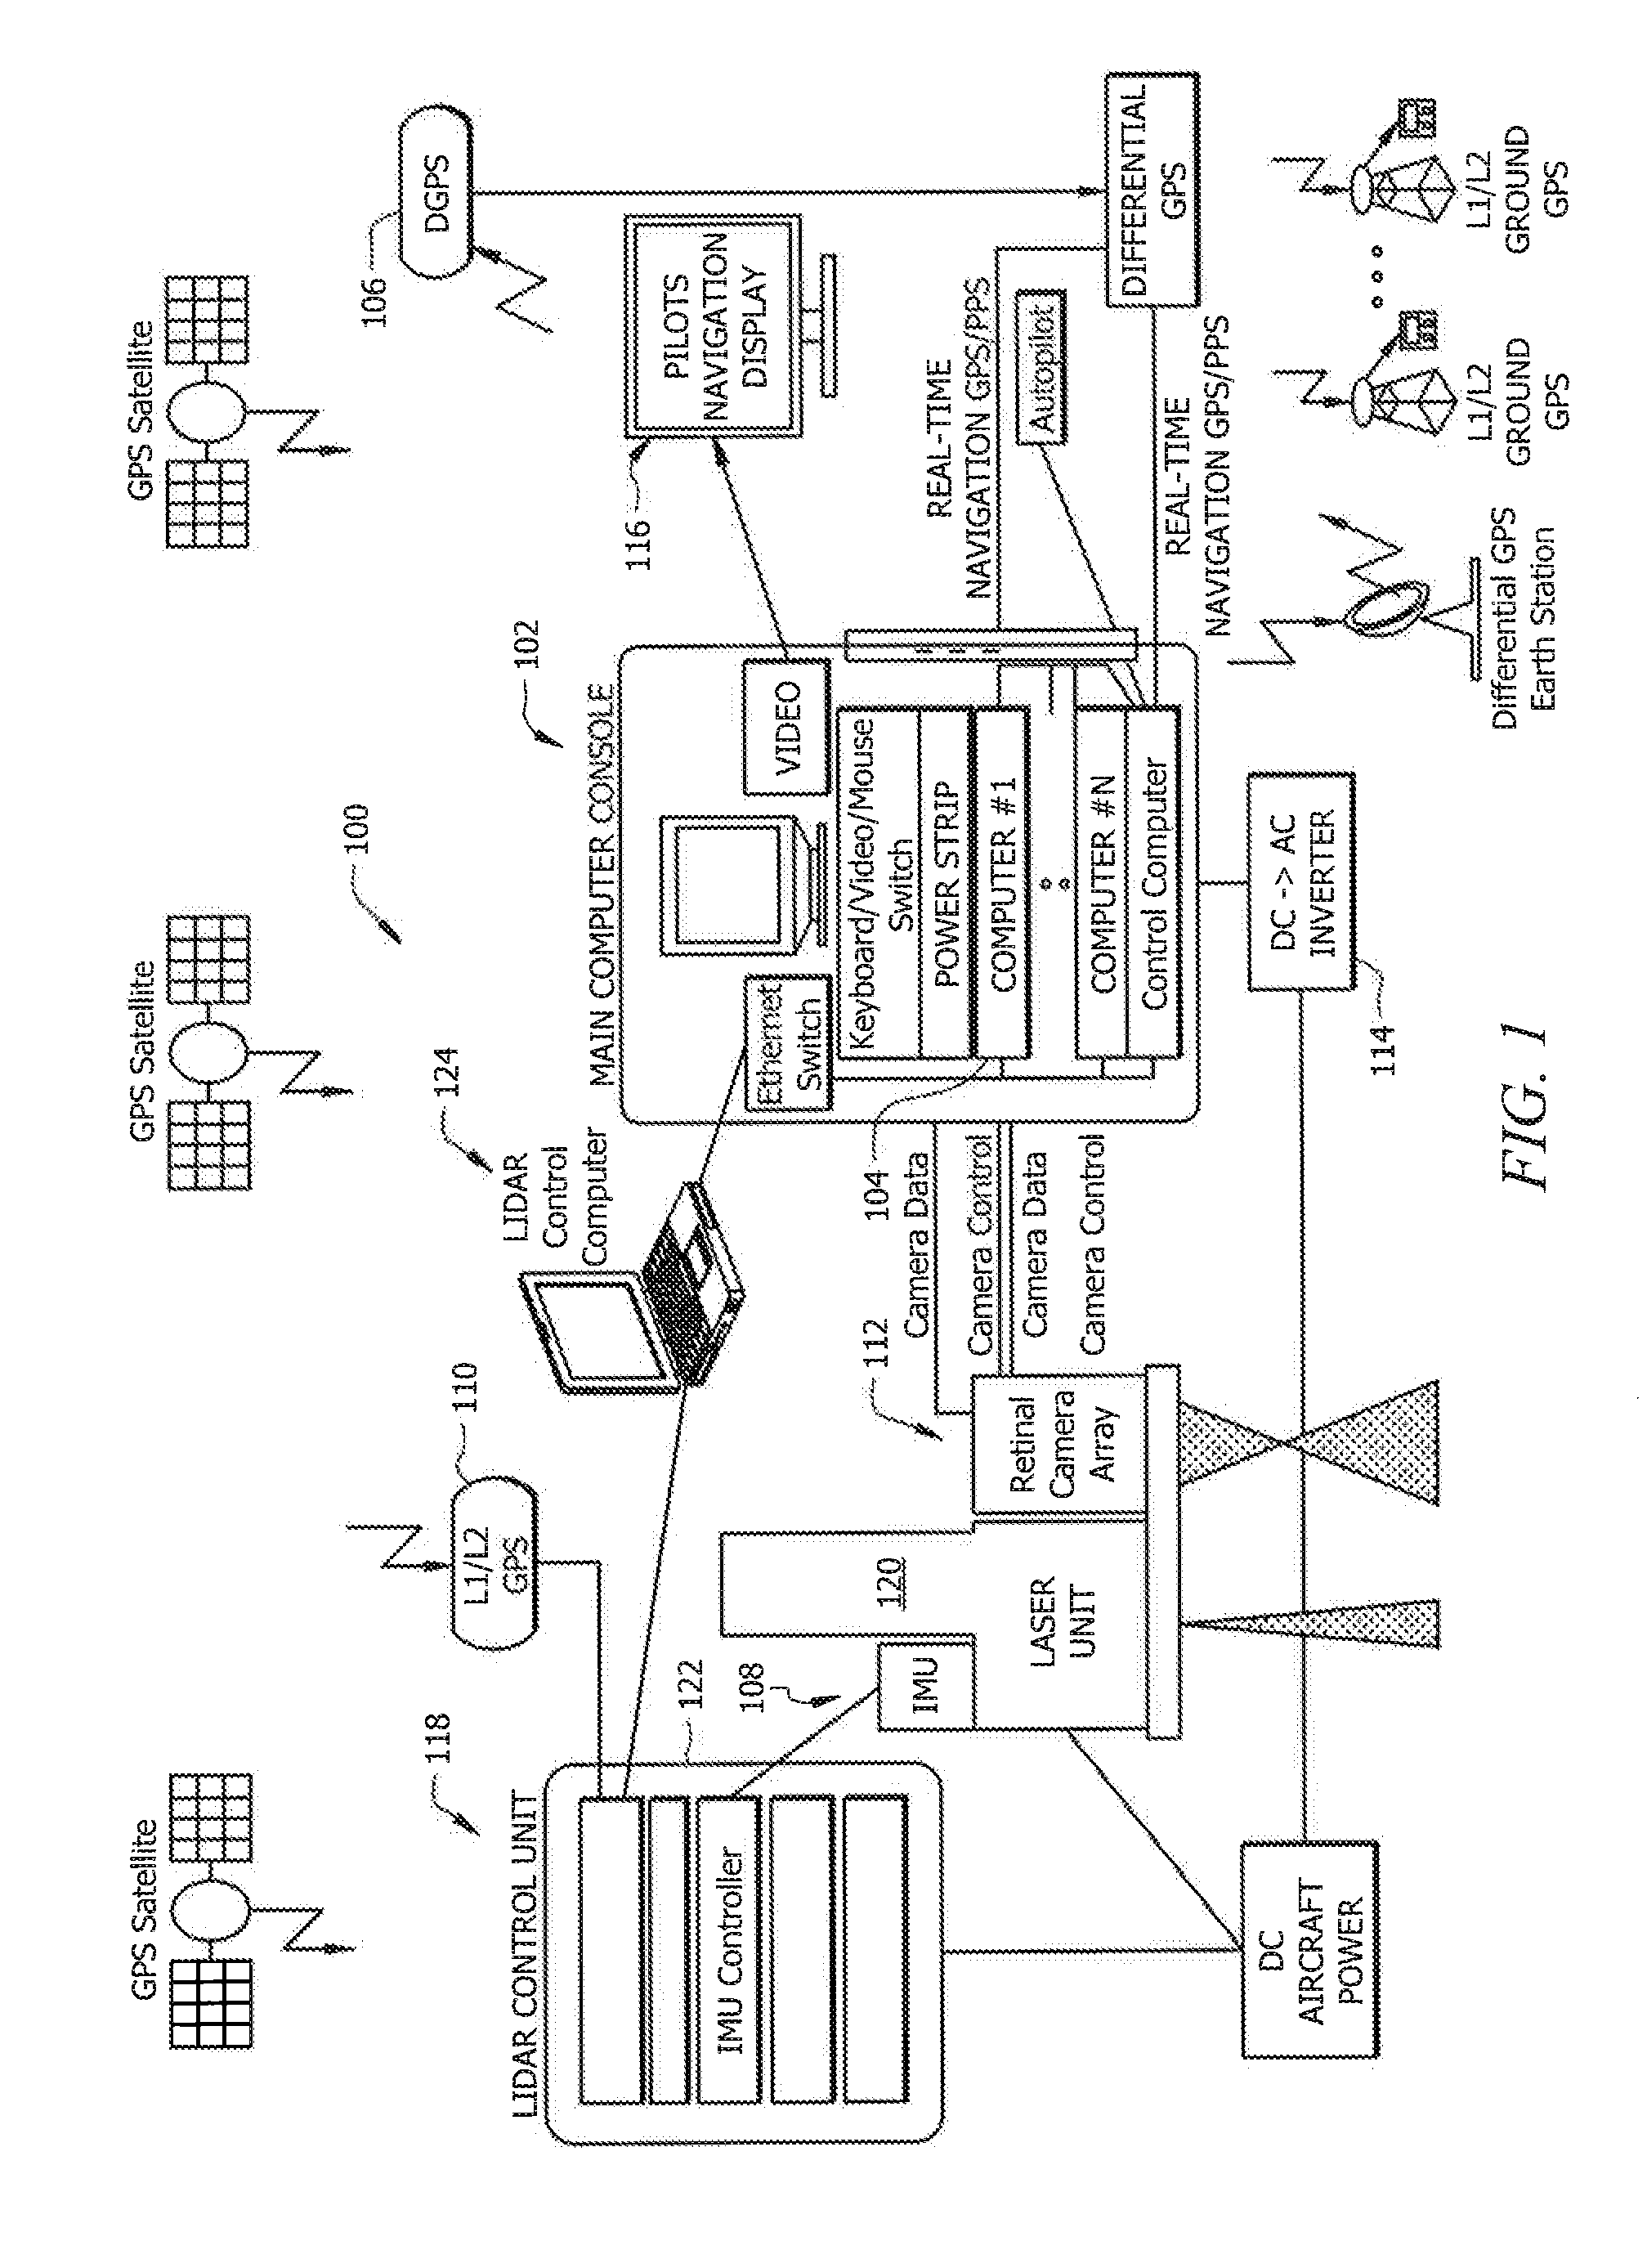 Self-calibrated, remote imaging and data processing system